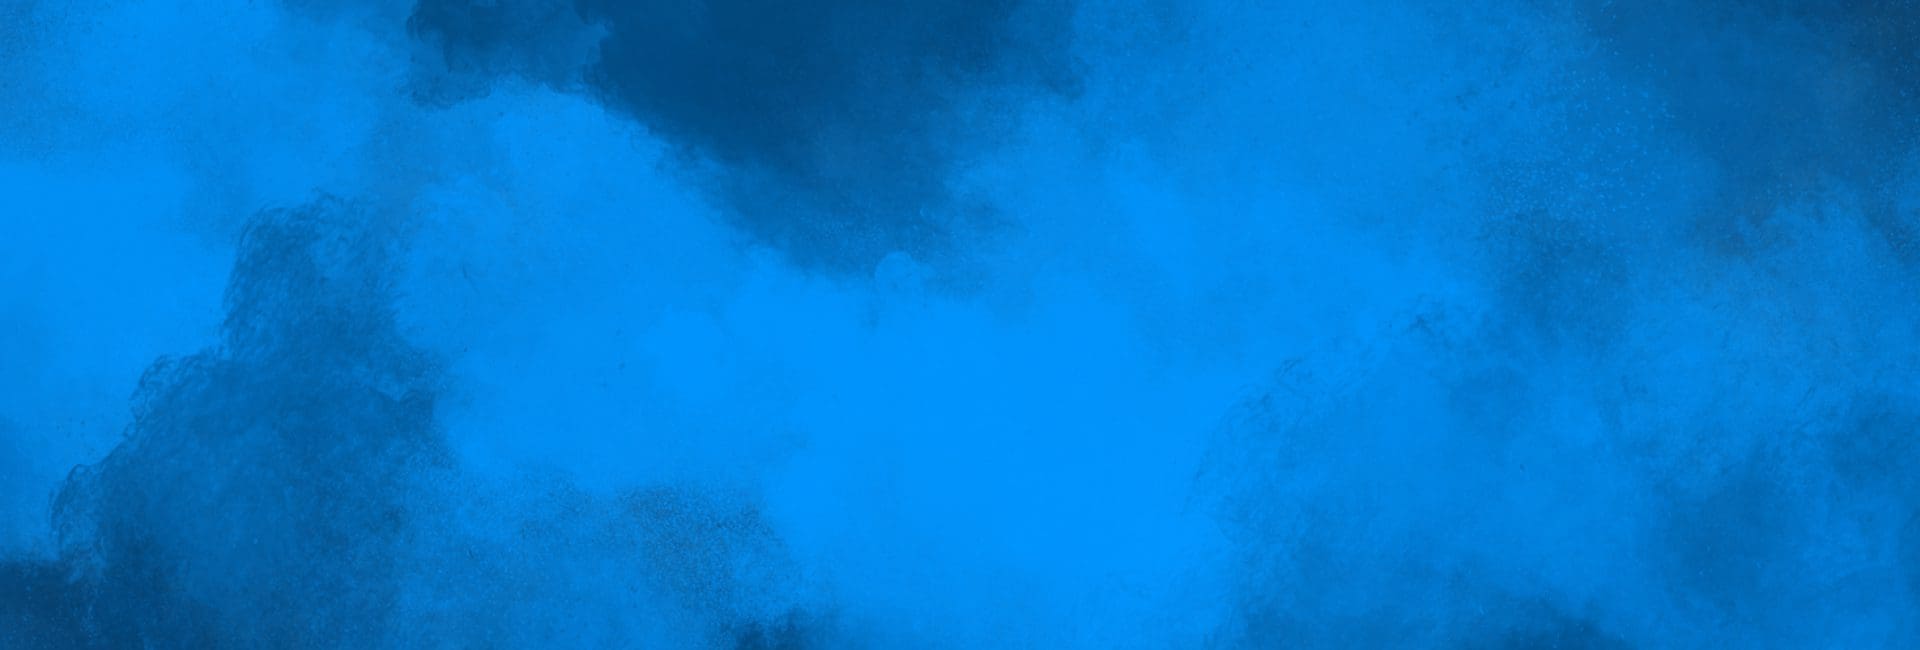 corporate-blue-texture-background-3